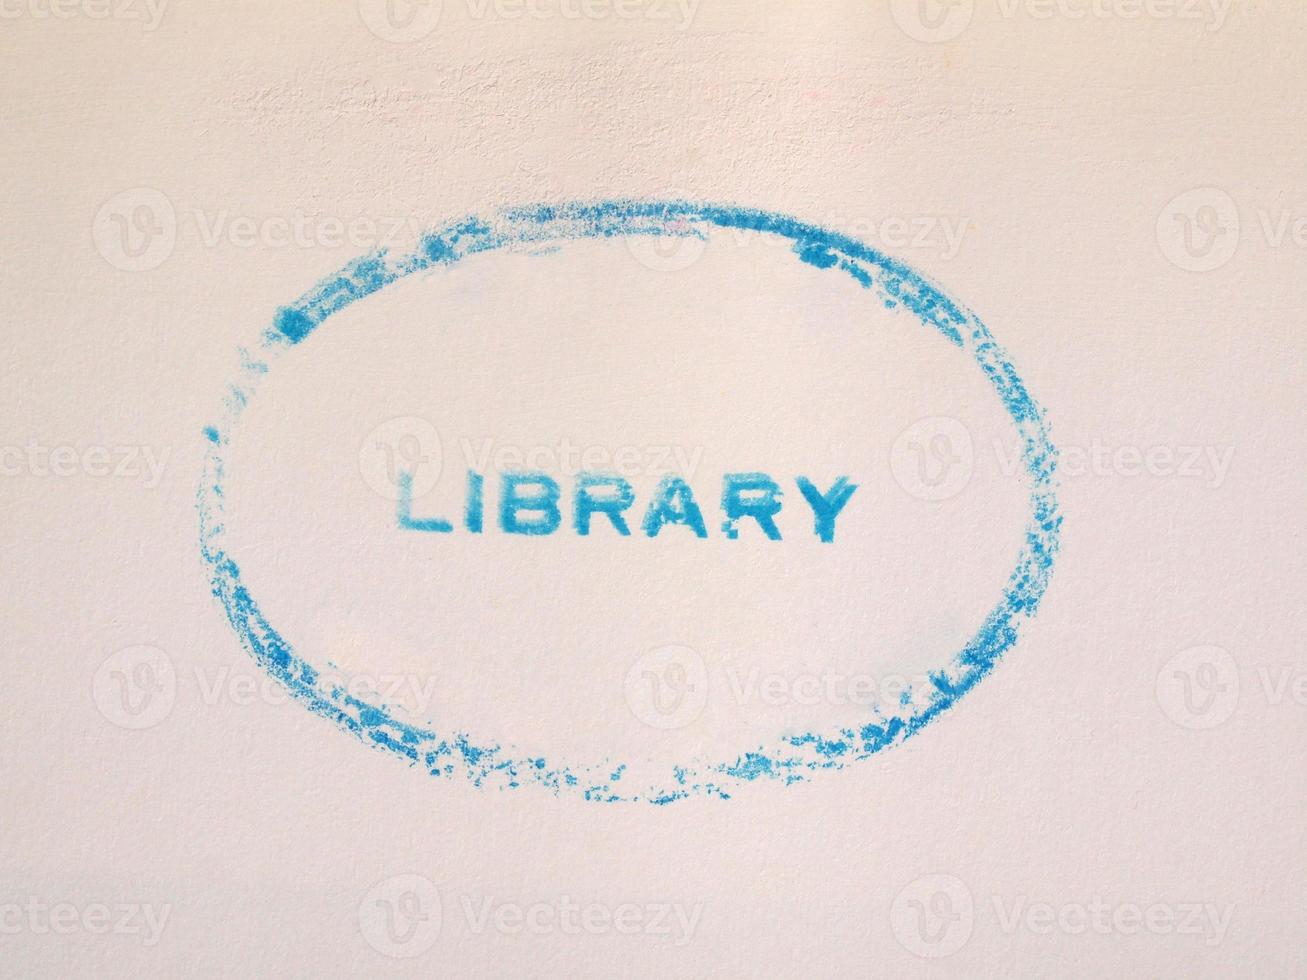 Library stamp on book photo